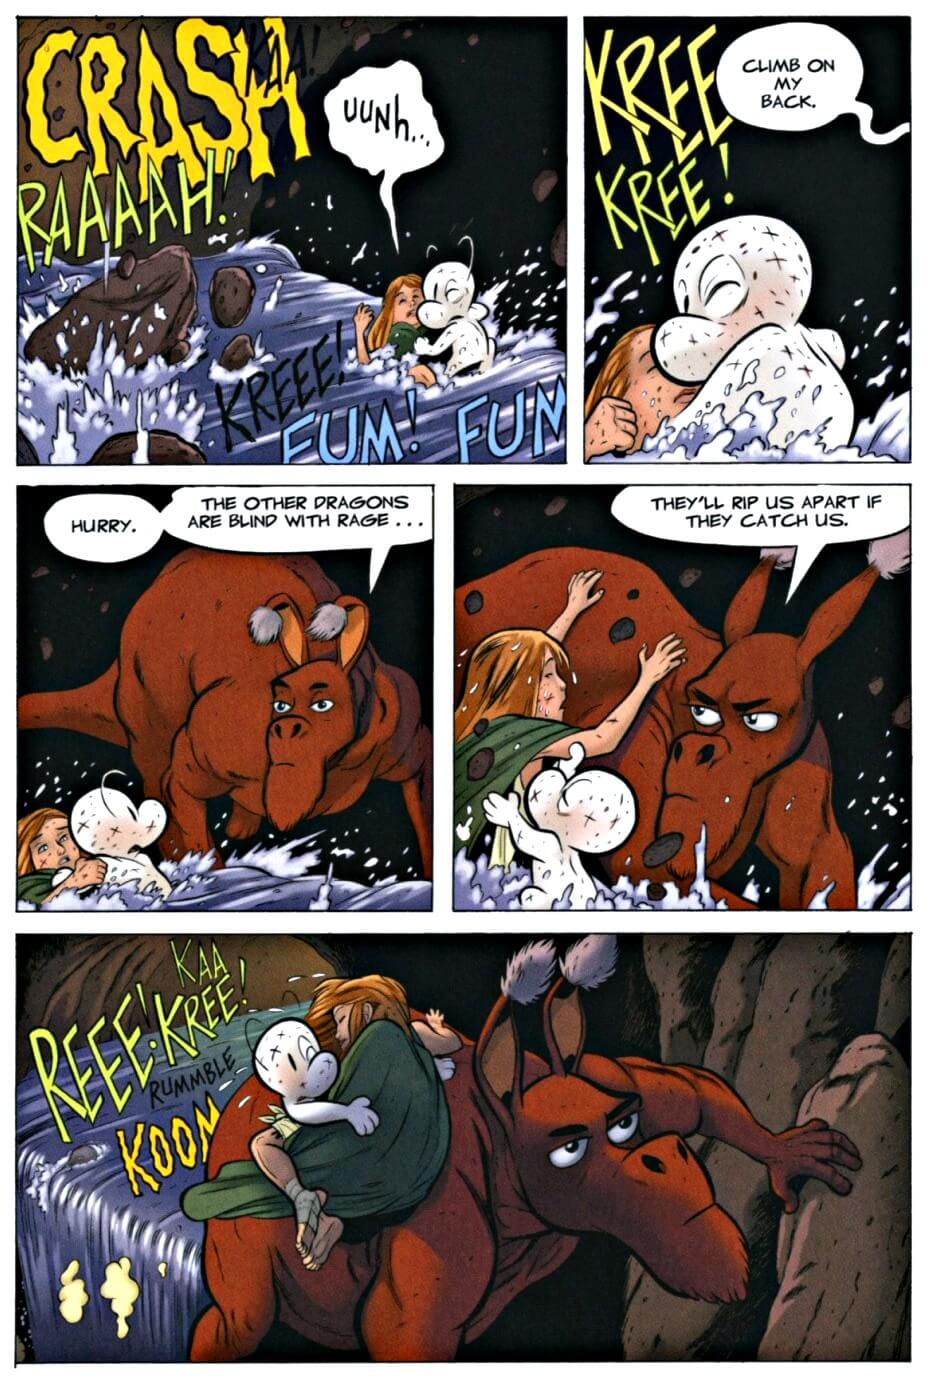 page 165 chapter 5 of bone 9 crown of horns graphic novel